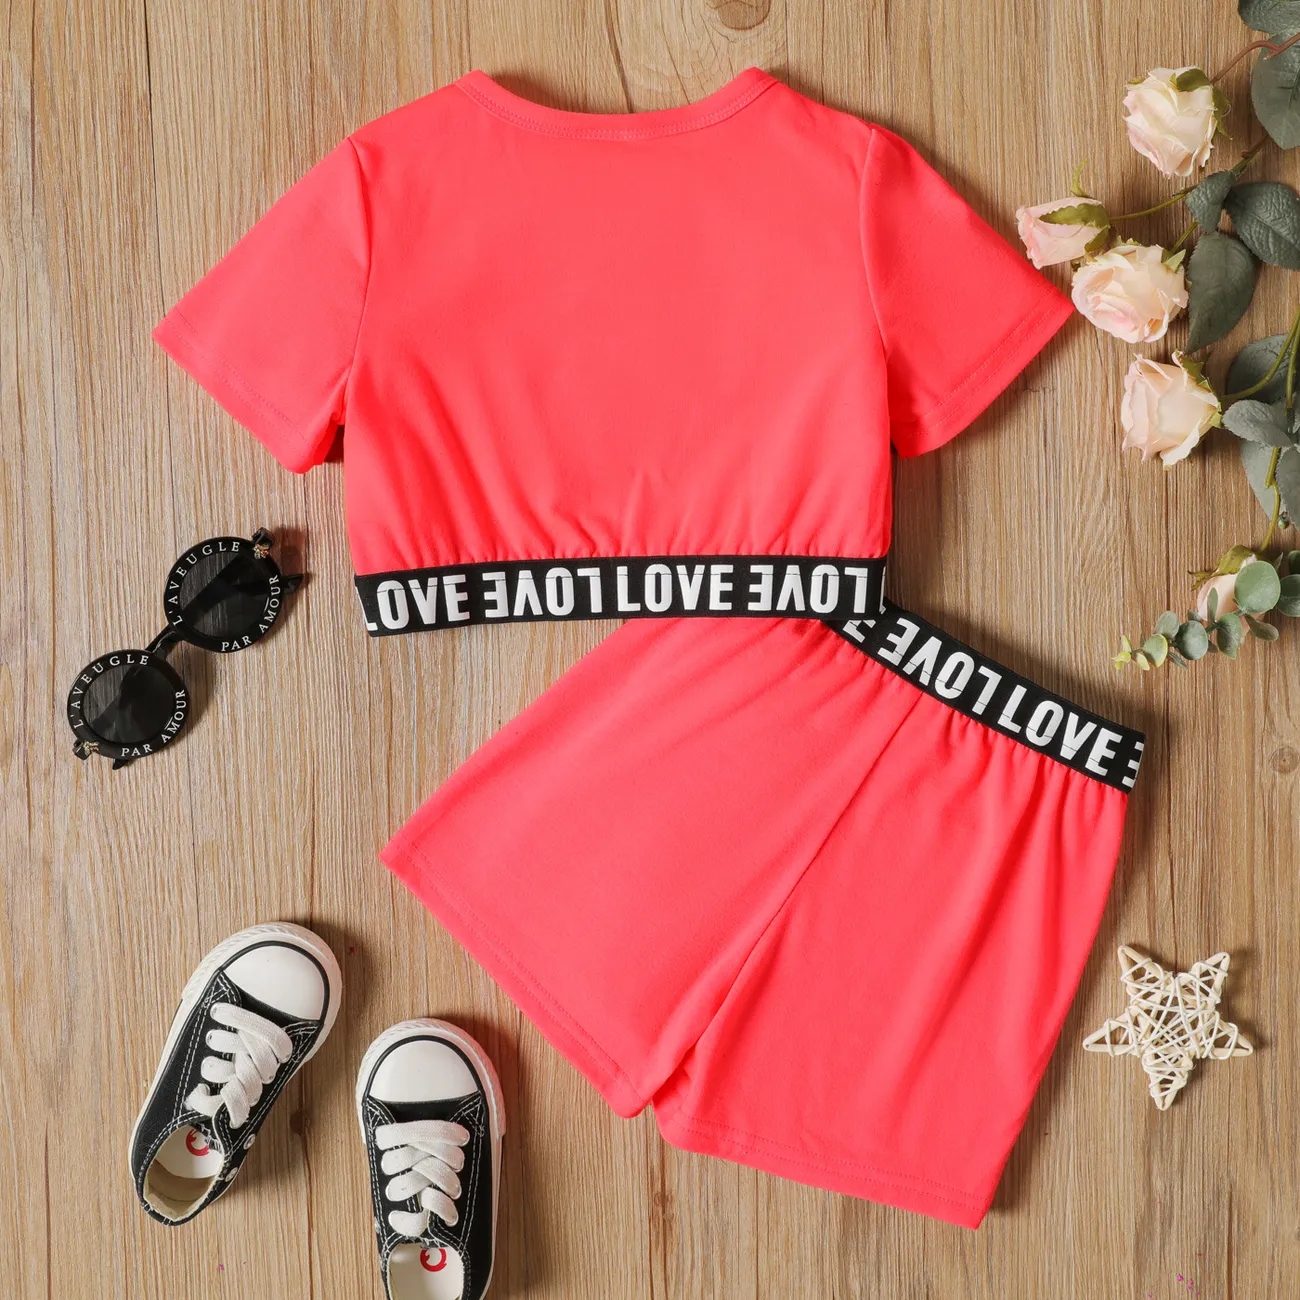 2-piece Toddler Girl Letter Print Crop Tee and Elasticized Shorts Set Pink big image 1